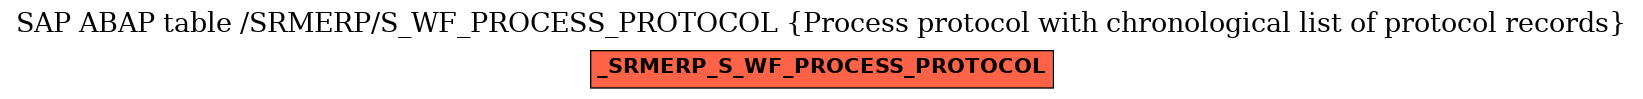 E-R Diagram for table /SRMERP/S_WF_PROCESS_PROTOCOL (Process protocol with chronological list of protocol records)